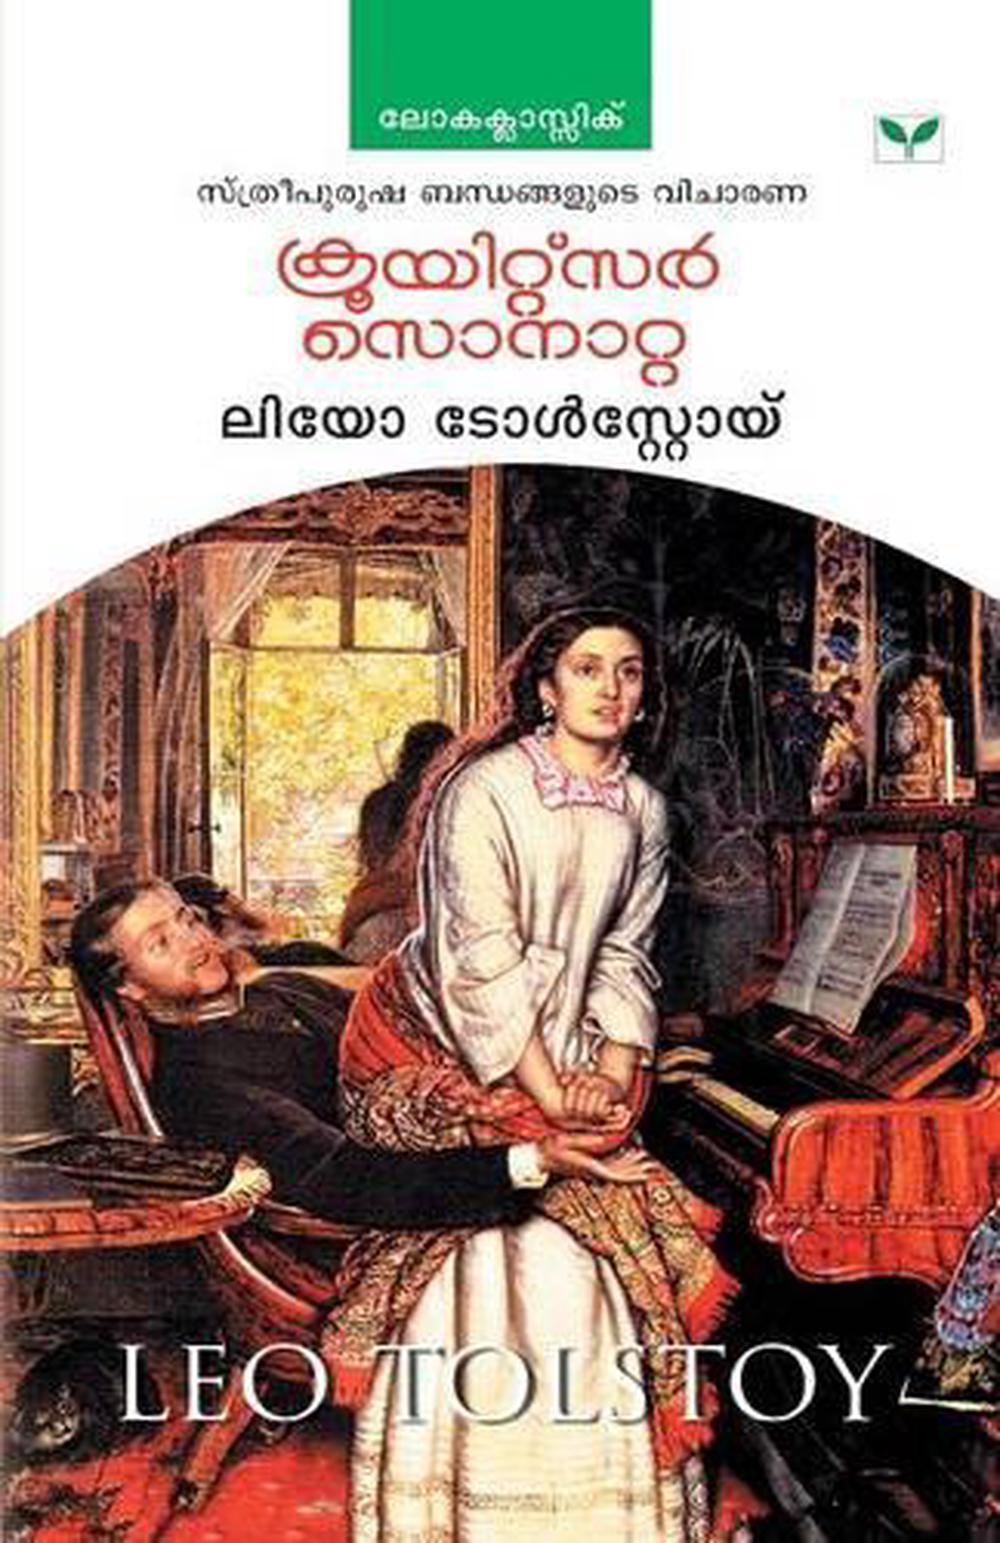 biography of leo tolstoy in malayalam